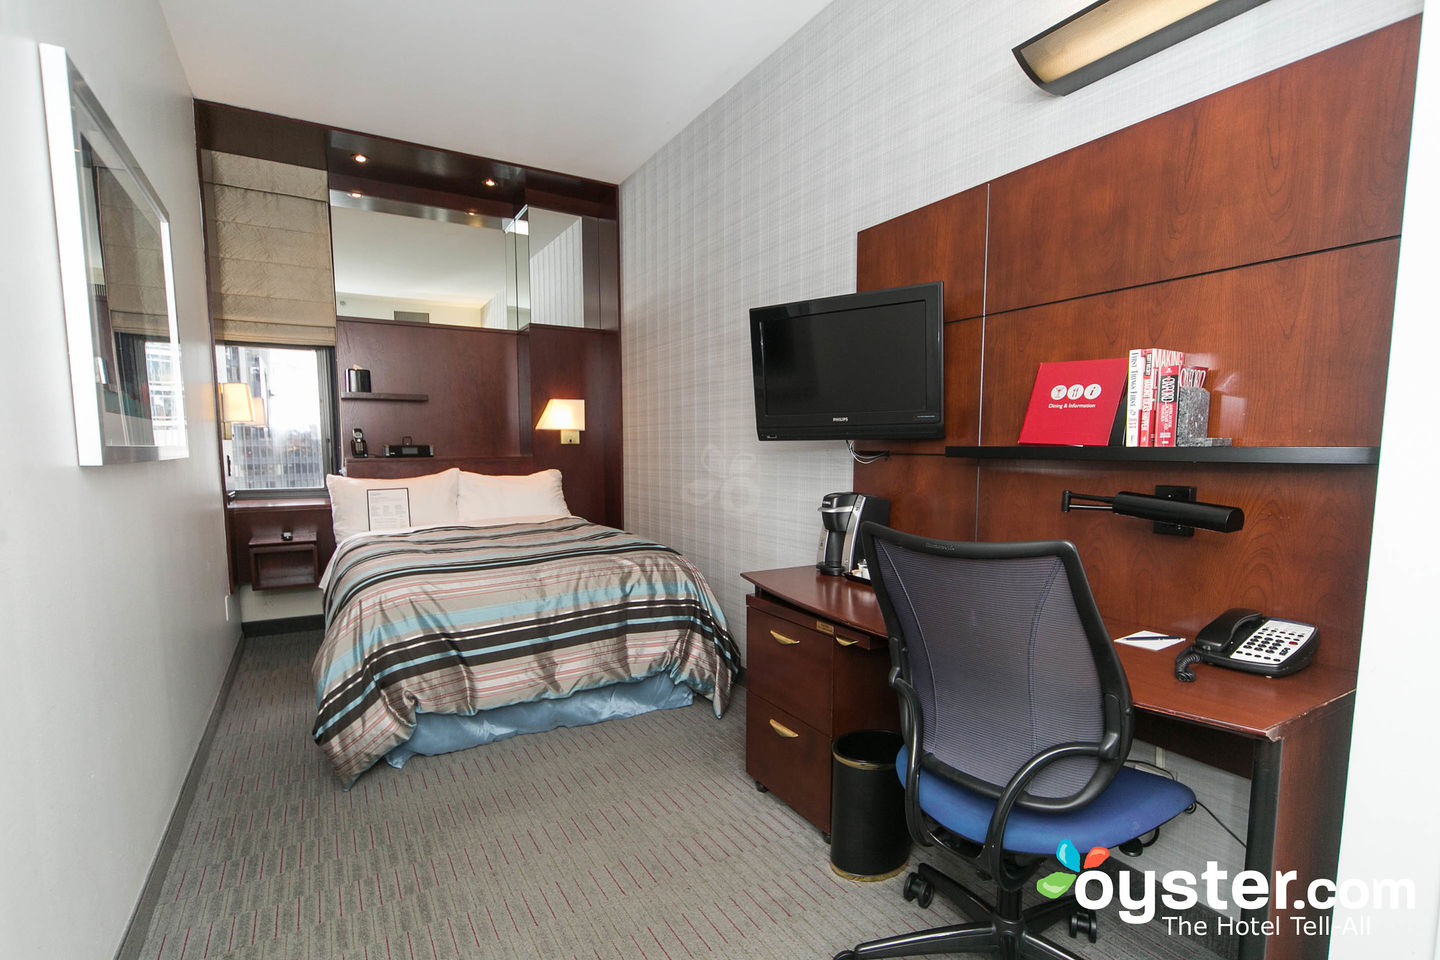 Club Quarters Hotel, Wacker at Michigan Review: What To REALLY Expect If  You Stay